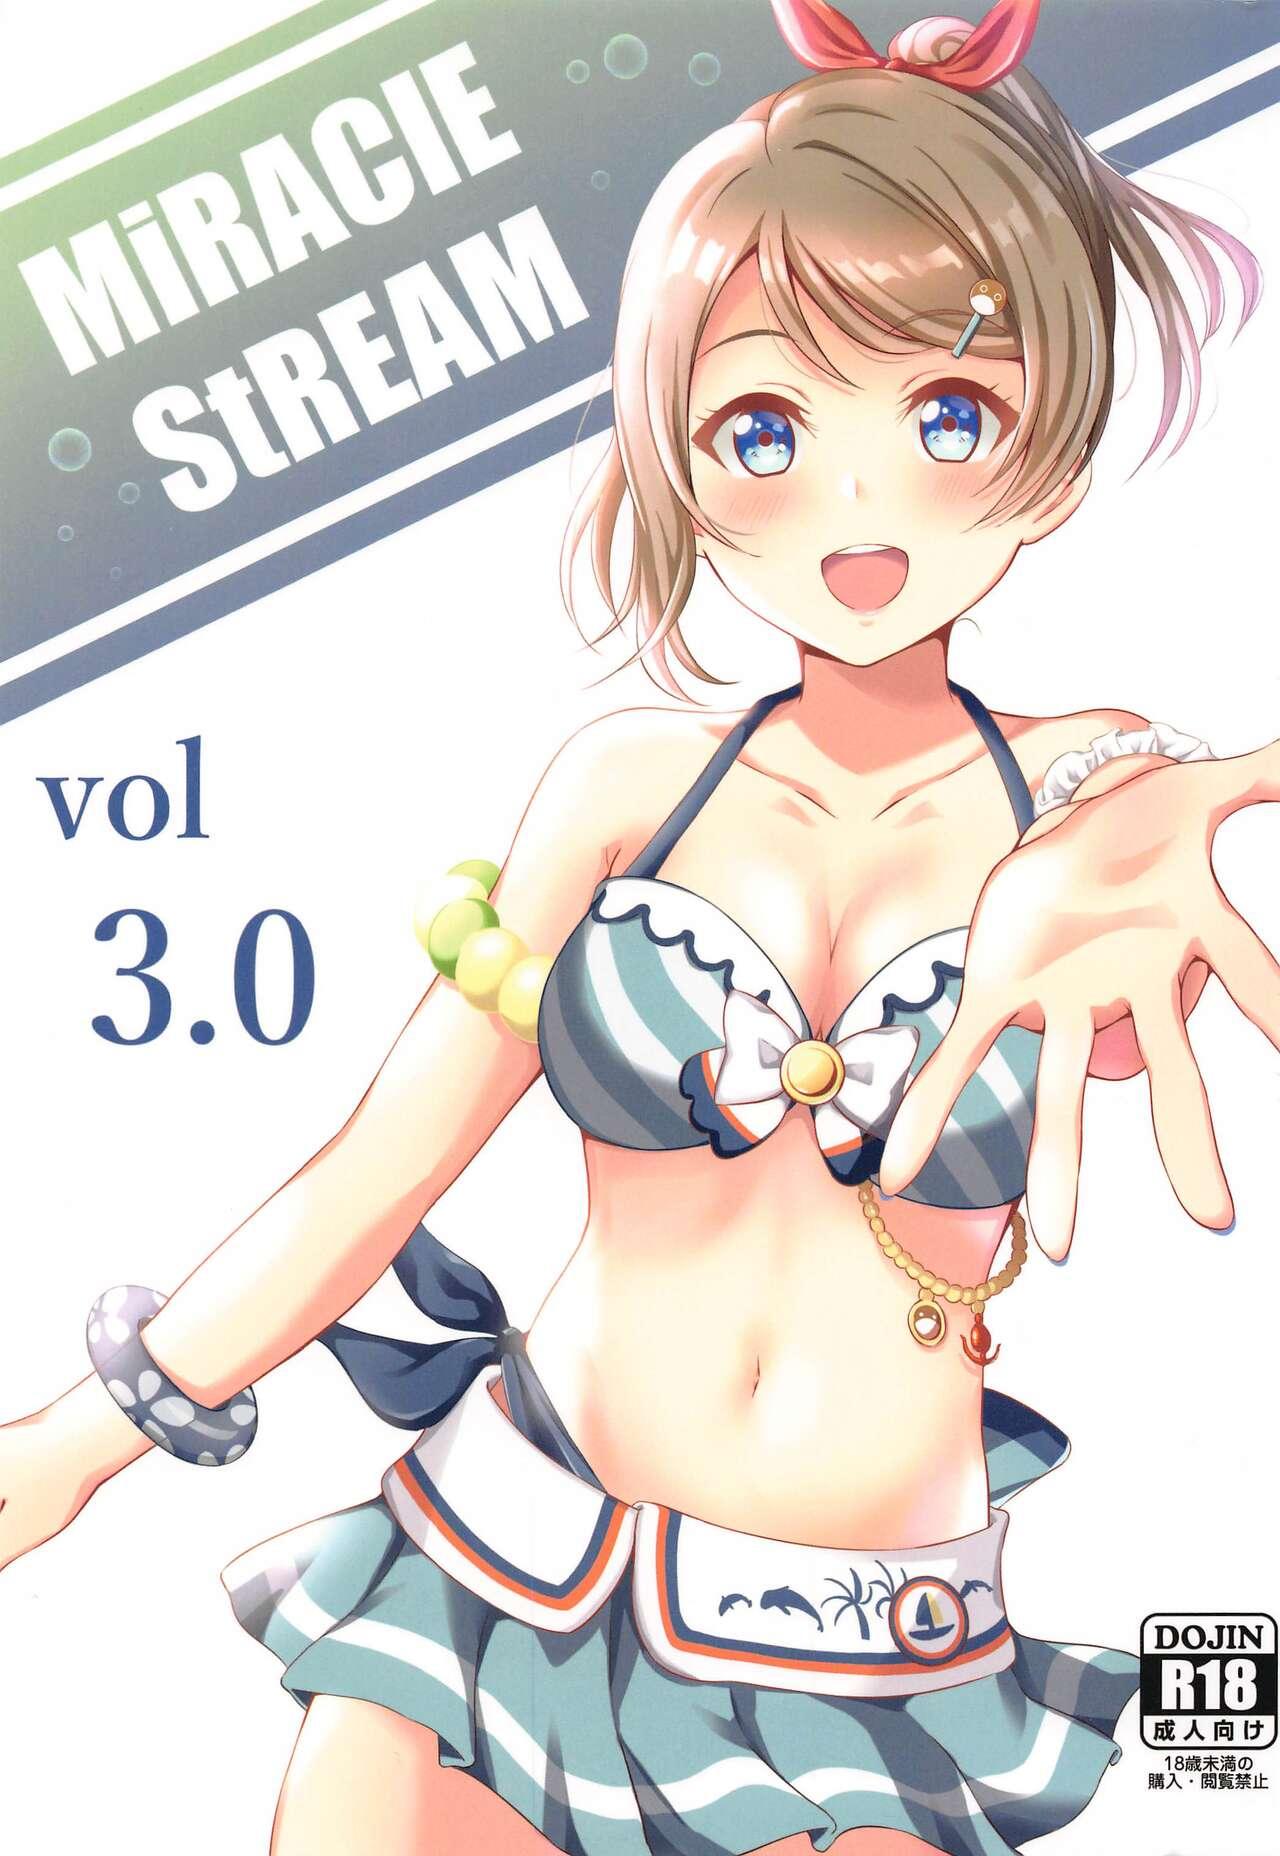 MIRACLE STREAM vol 3.0 0